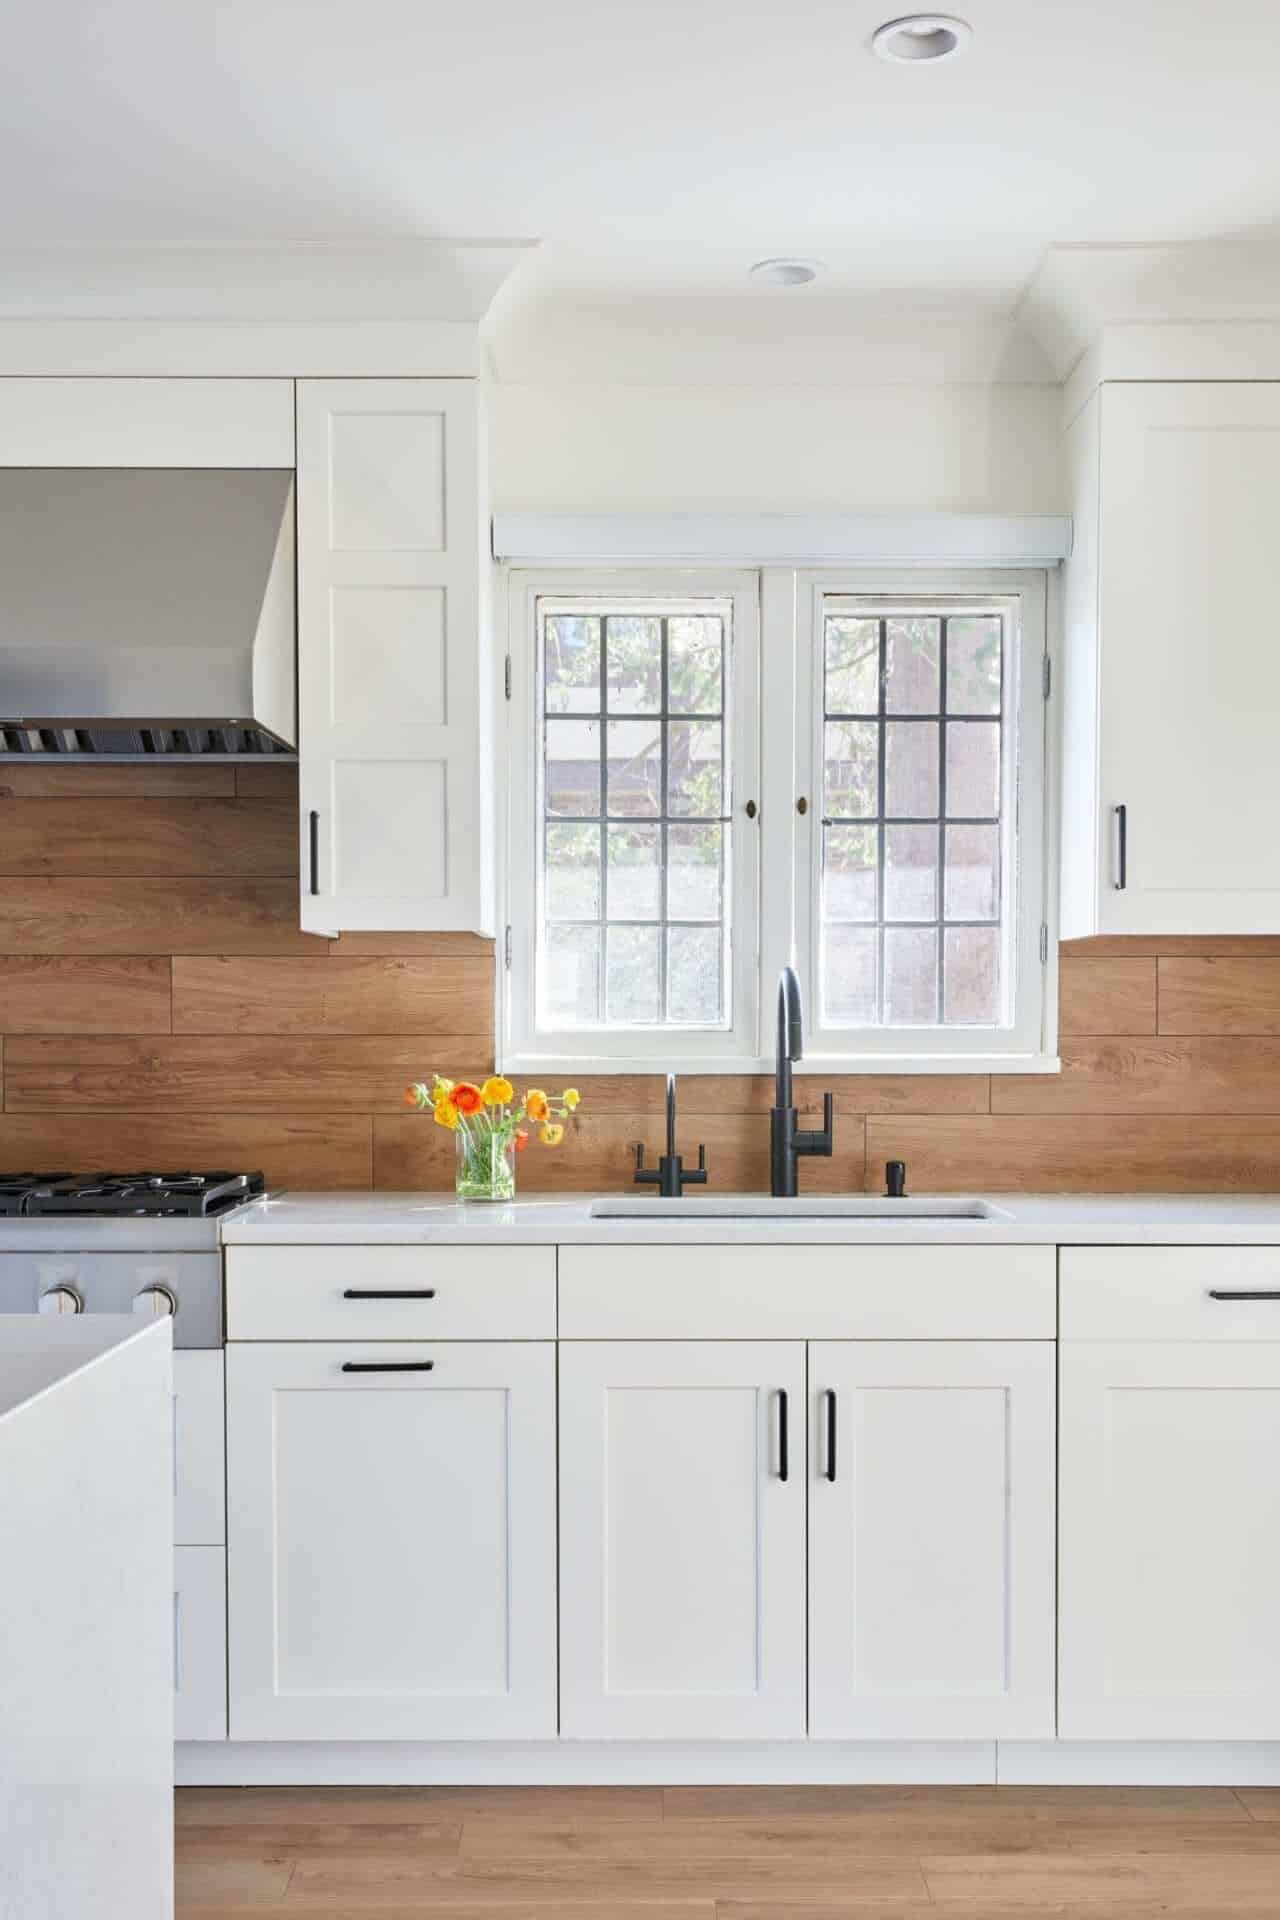 All white classic kitchen with wood backsplash and black faucet.